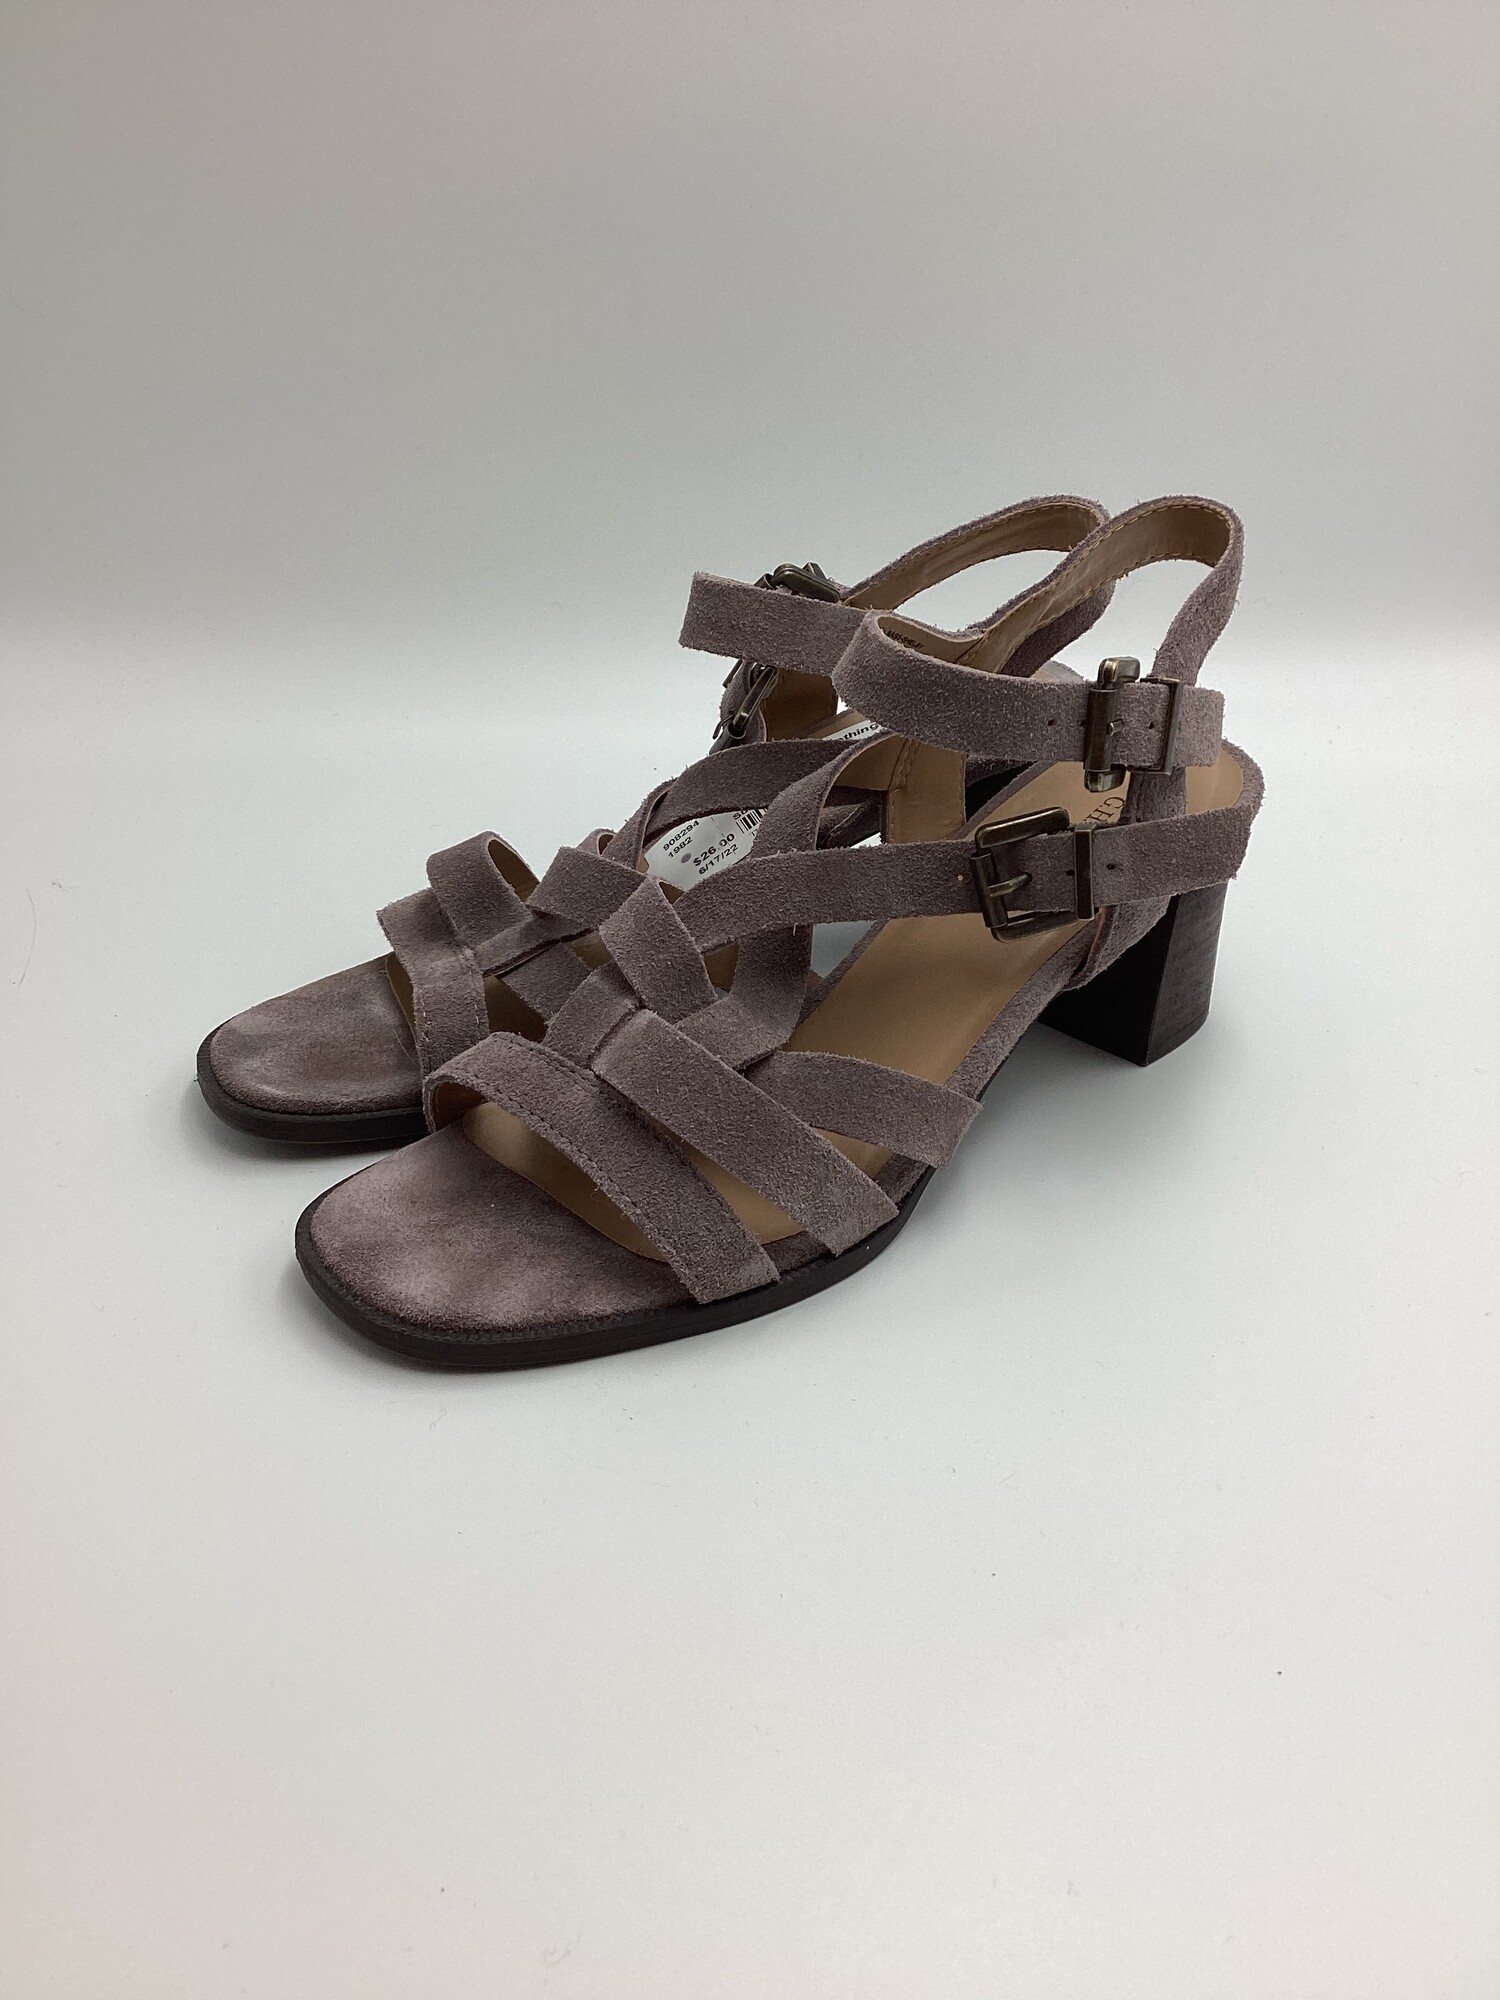 Suede Strappy Sandals, Taupe, Size: 6.5